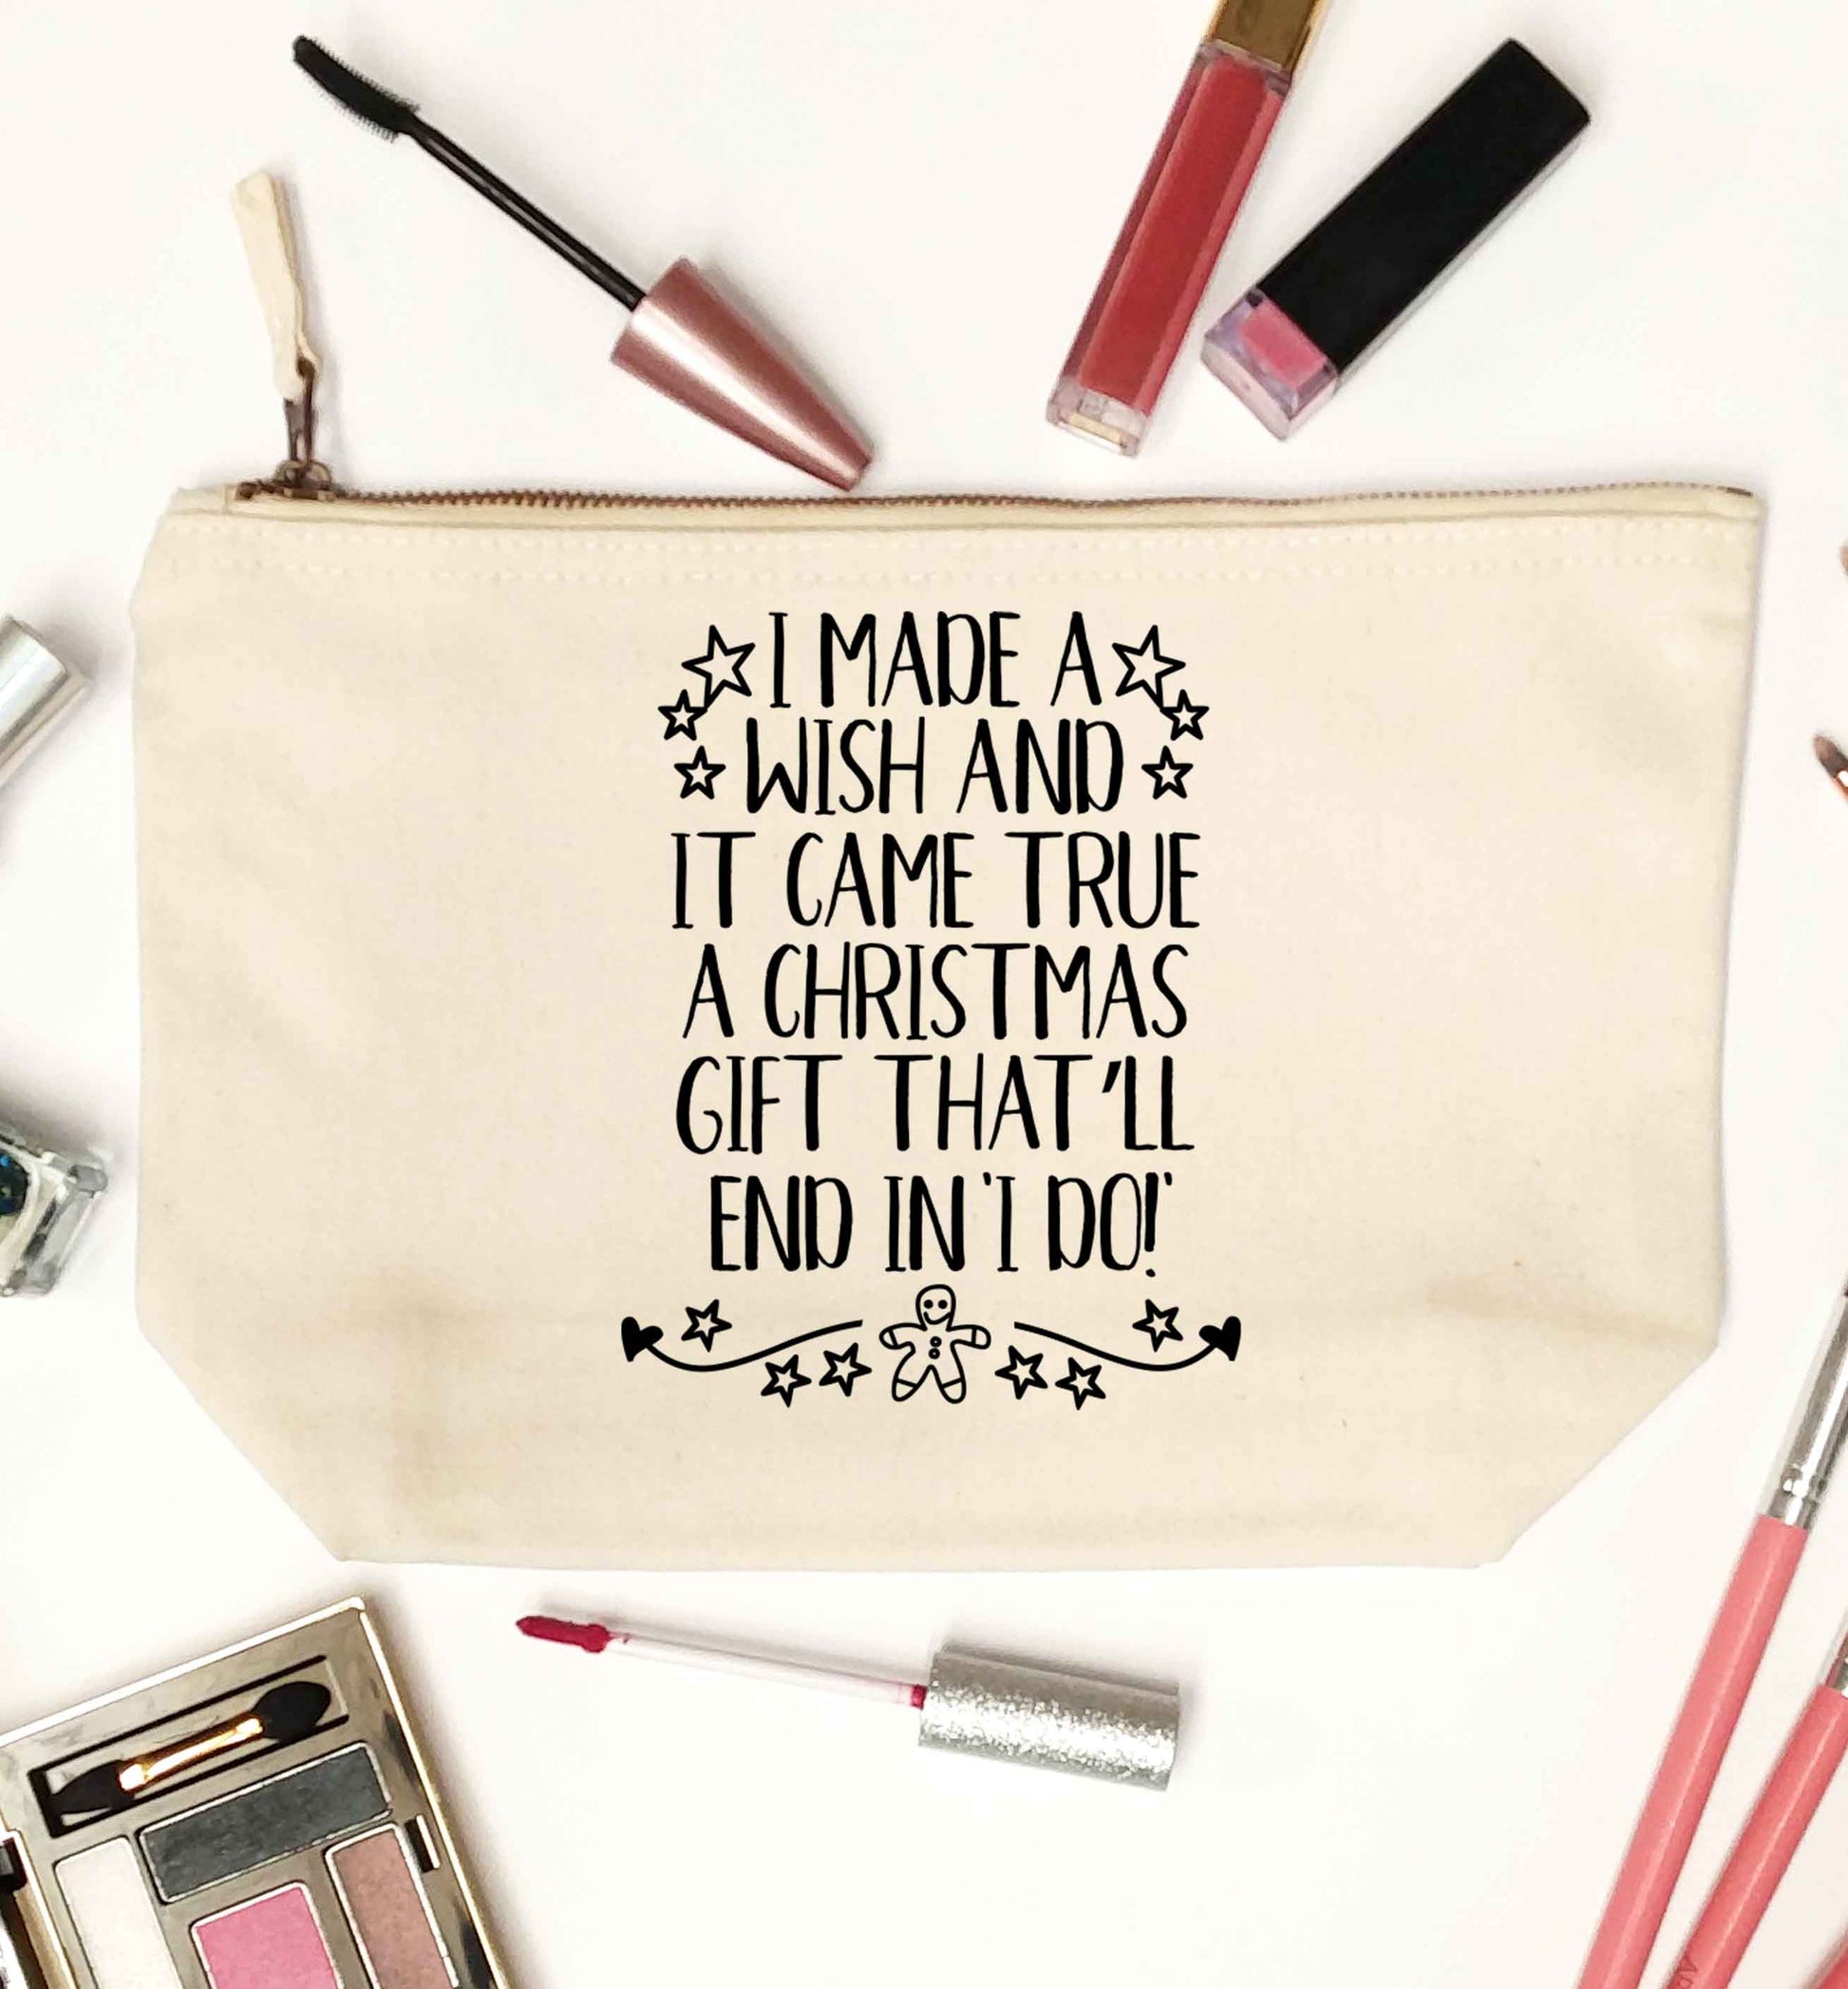 I made a wish and it came true a Christmas gift that'll end in 'I do' natural makeup bag